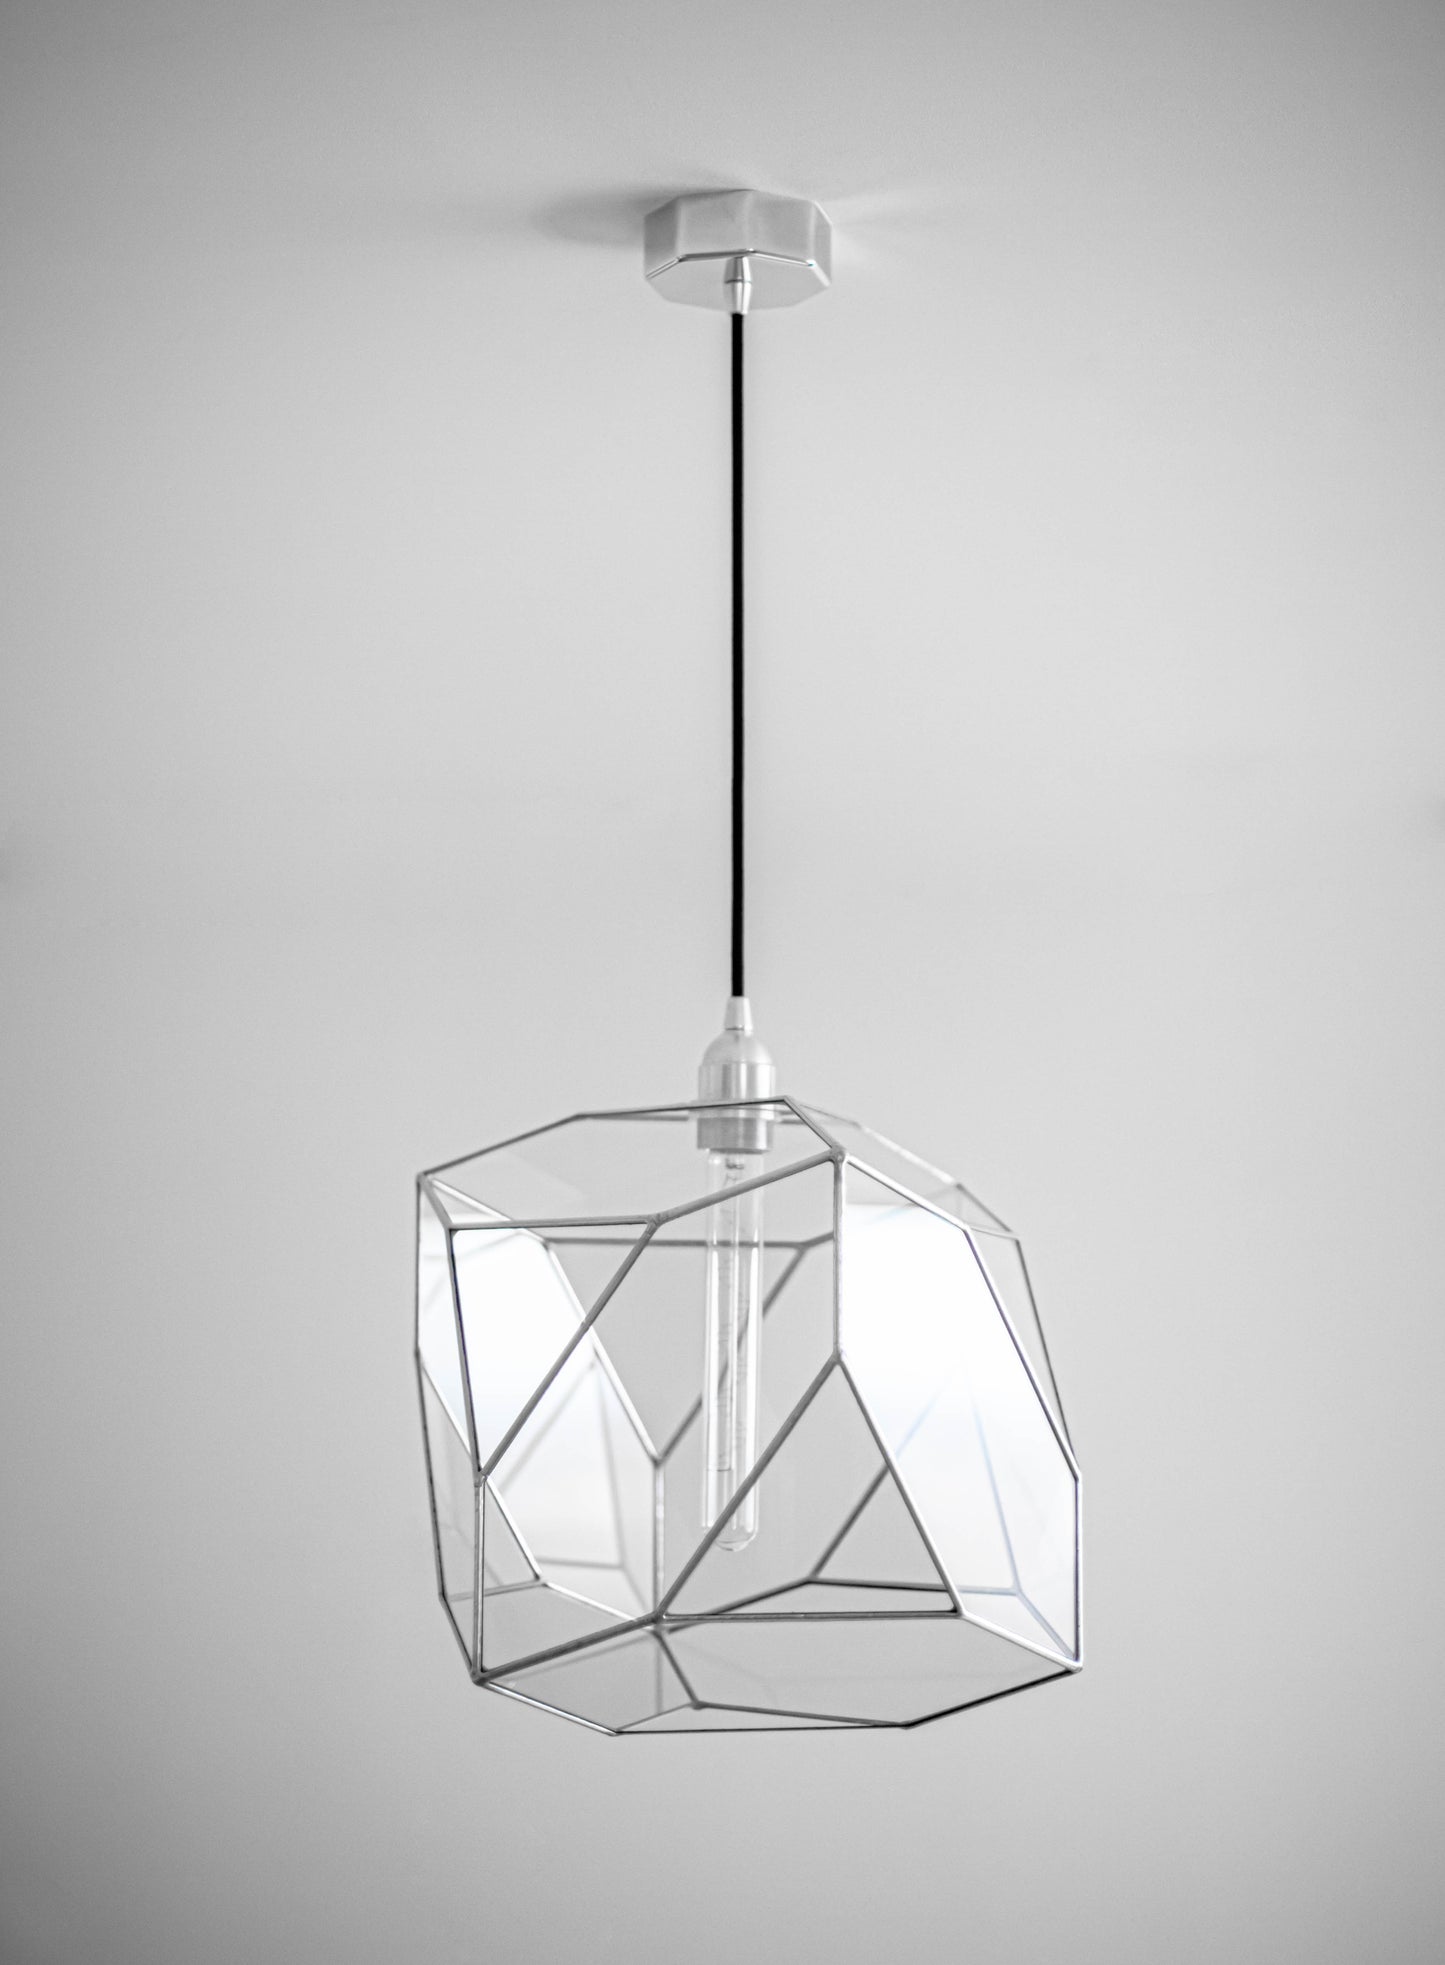 Projected Octahedron Exclusive Geometric Glass Chandelier